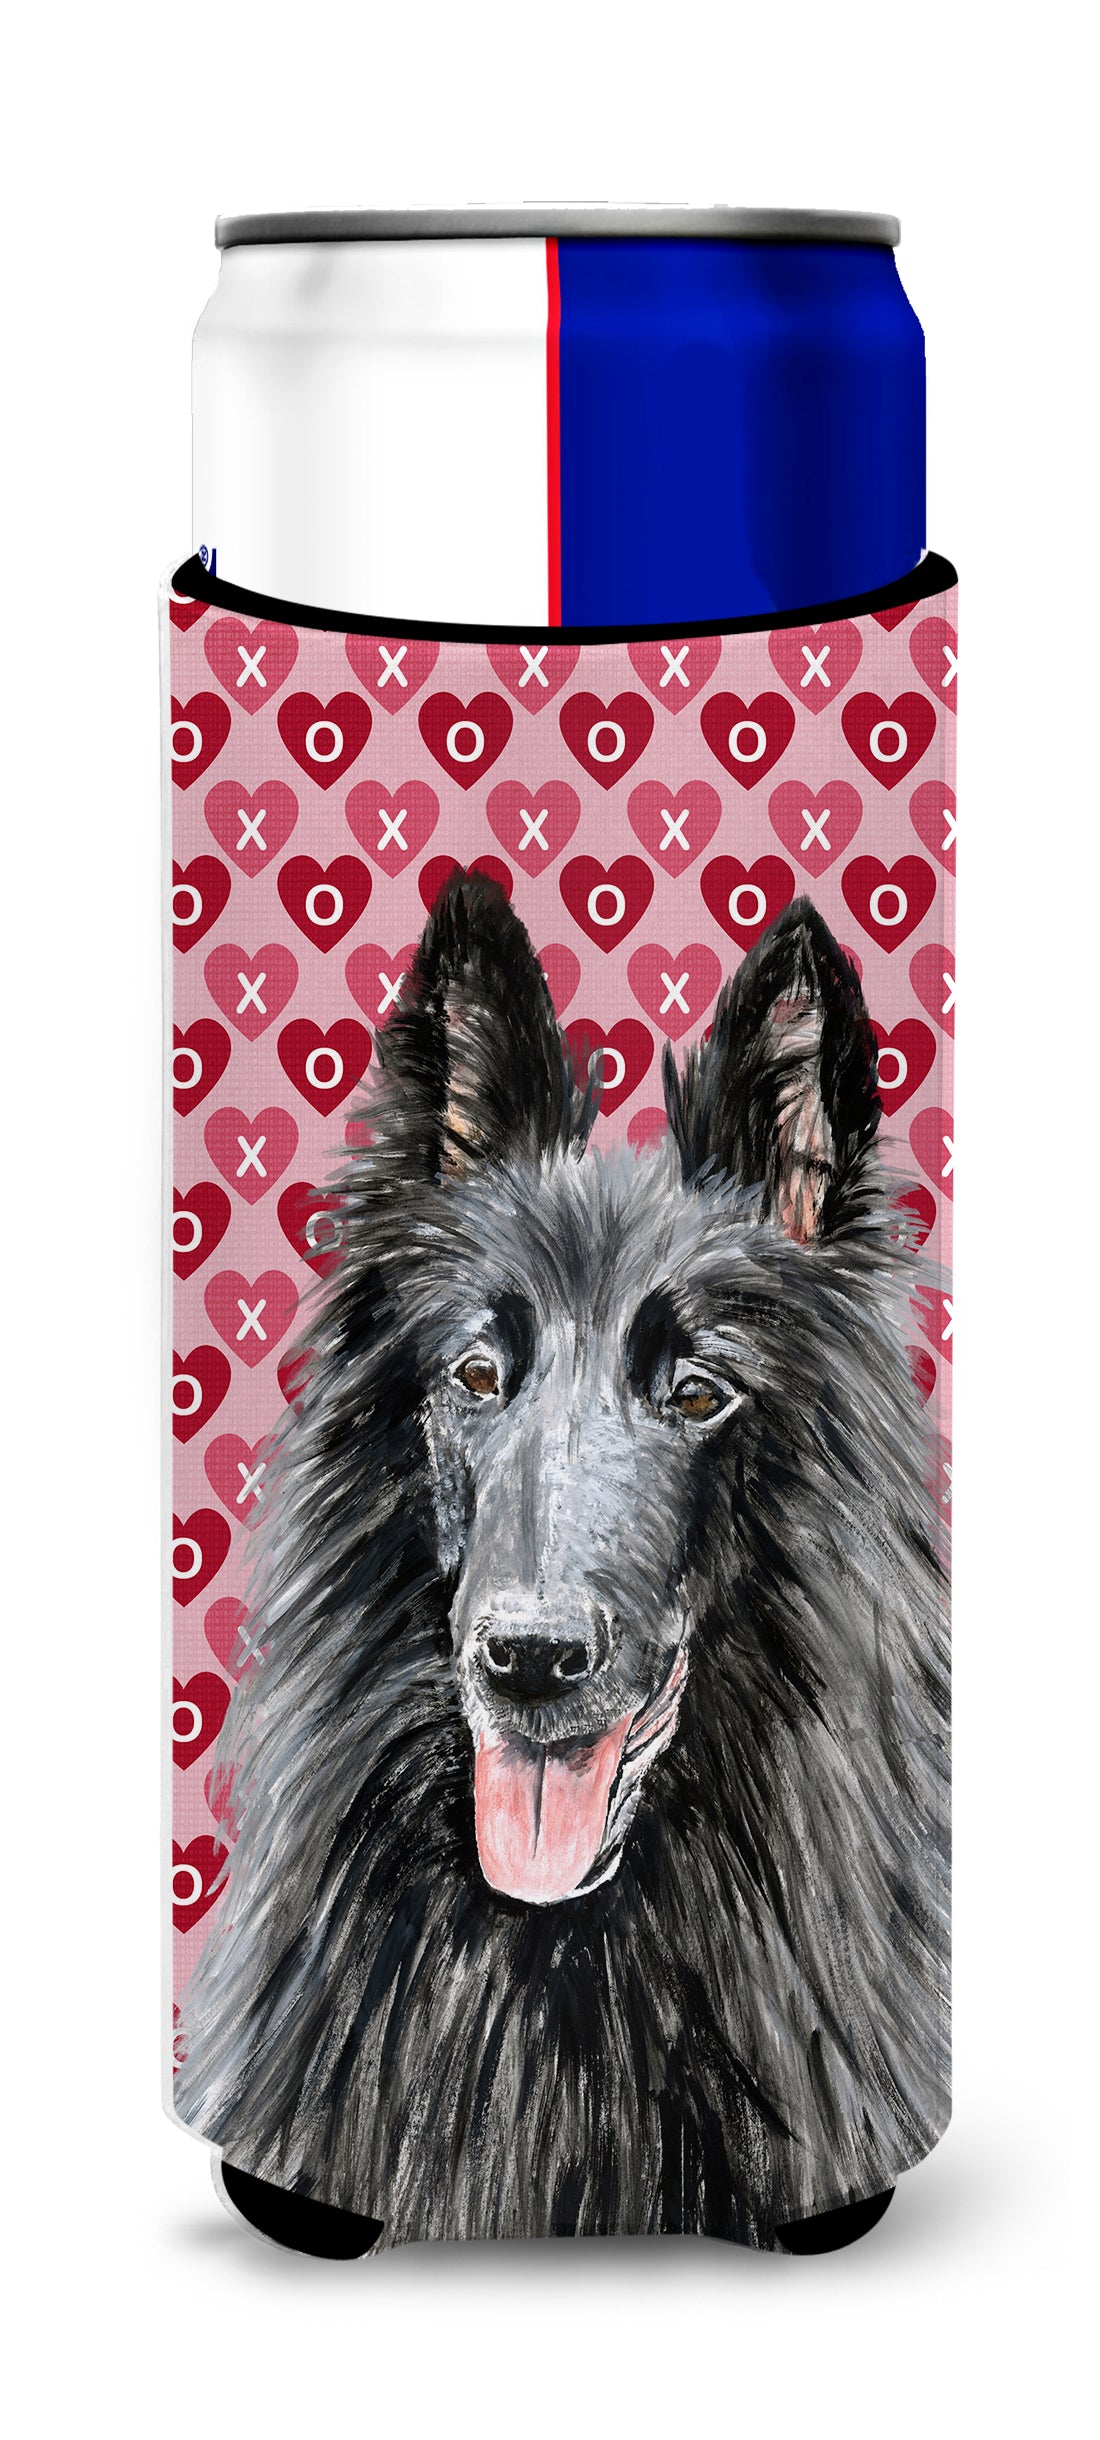 Belgian Sheepdog Hearts Love and Valentine's Day Portrait Ultra Beverage Insulators for slim cans SC9241MUK.